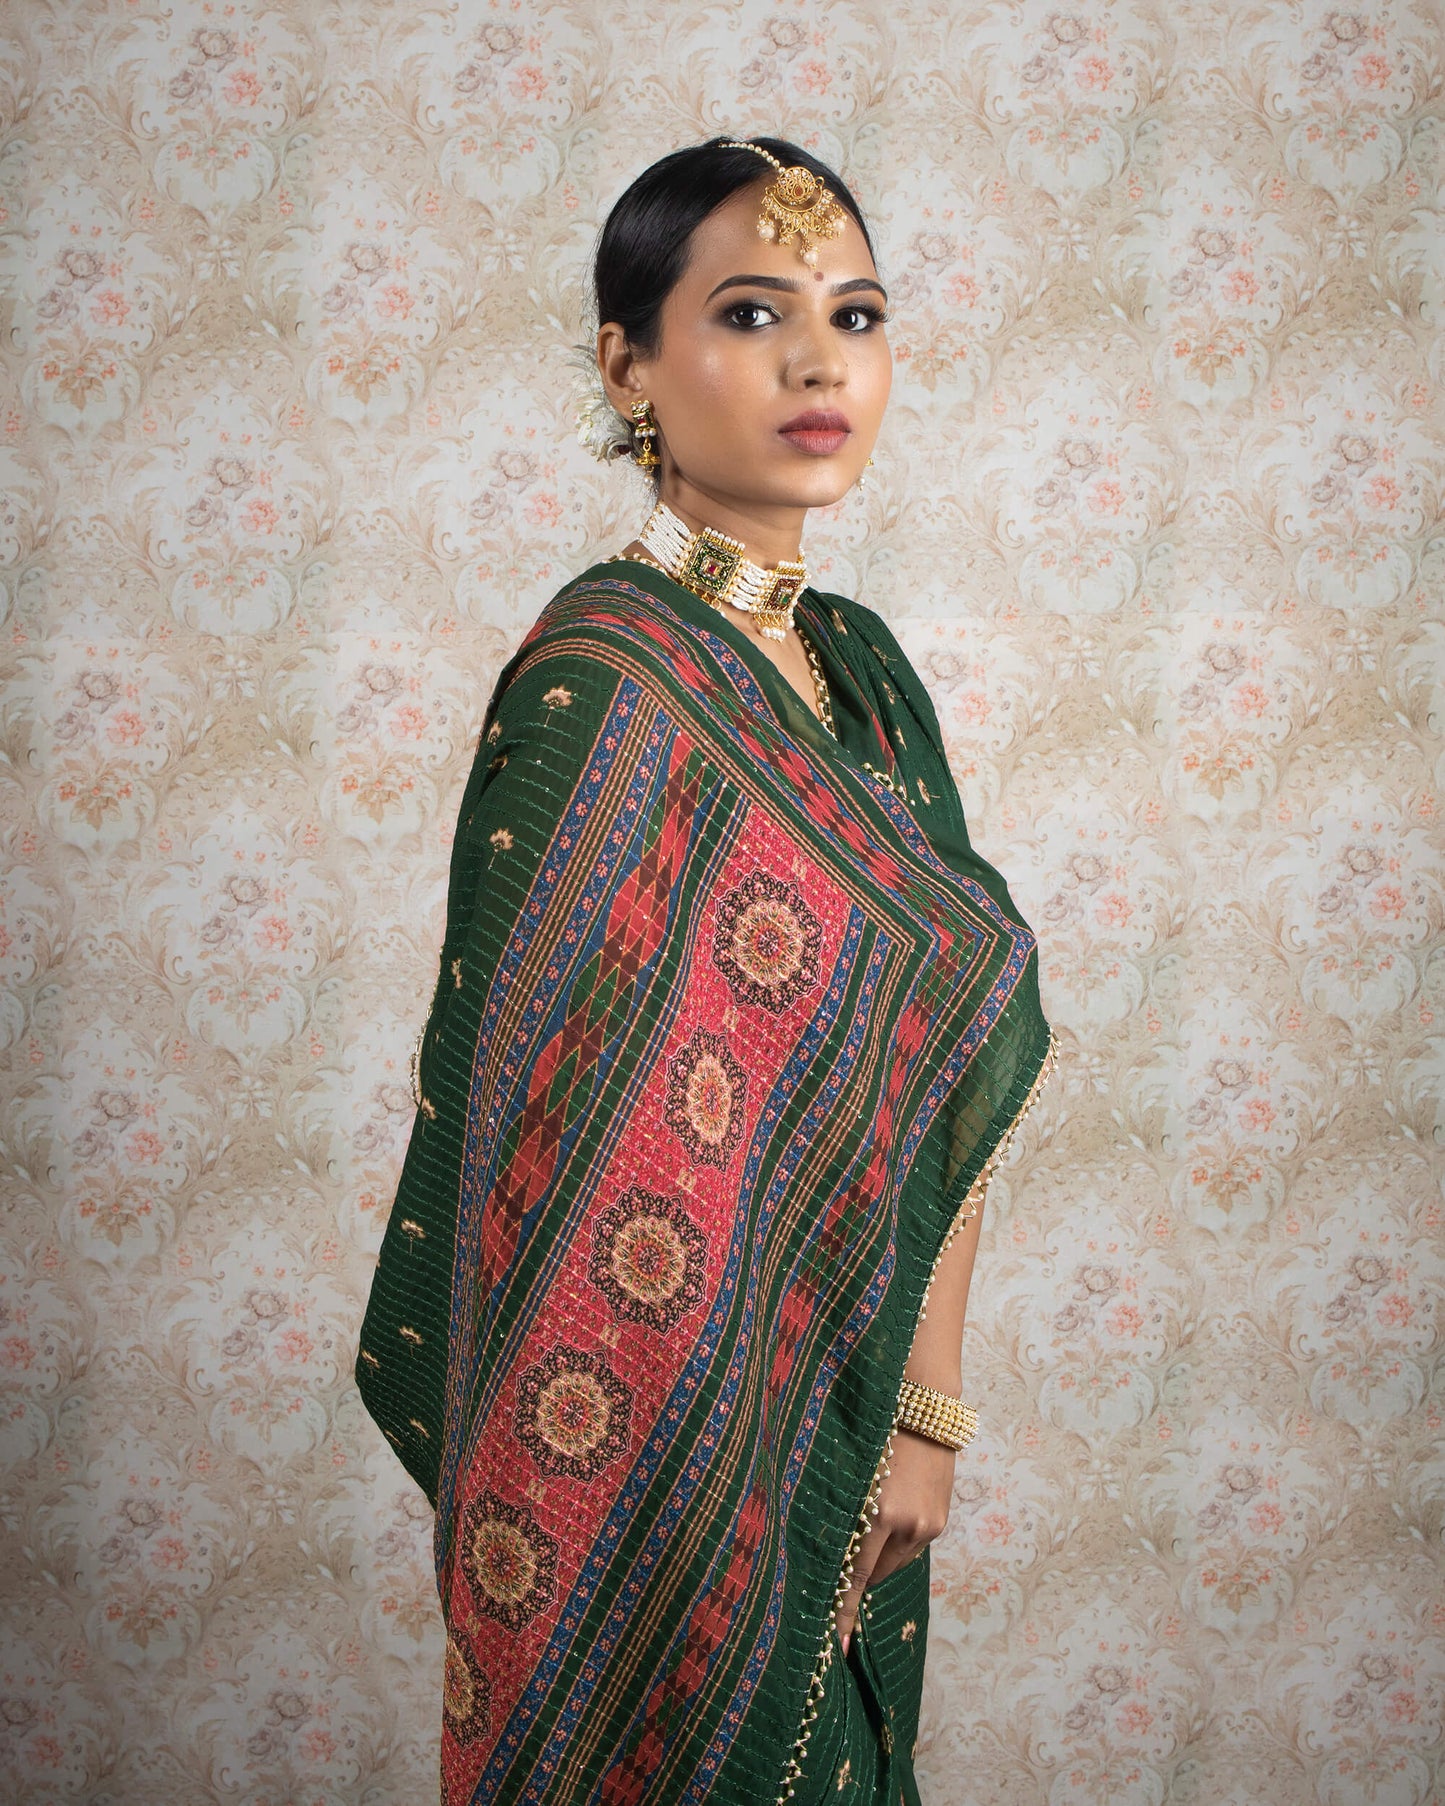 Bottle Green And Maroon Floral Pattren Sequins Georgette Saree With Tubular Beads Pearl Work Lace Border